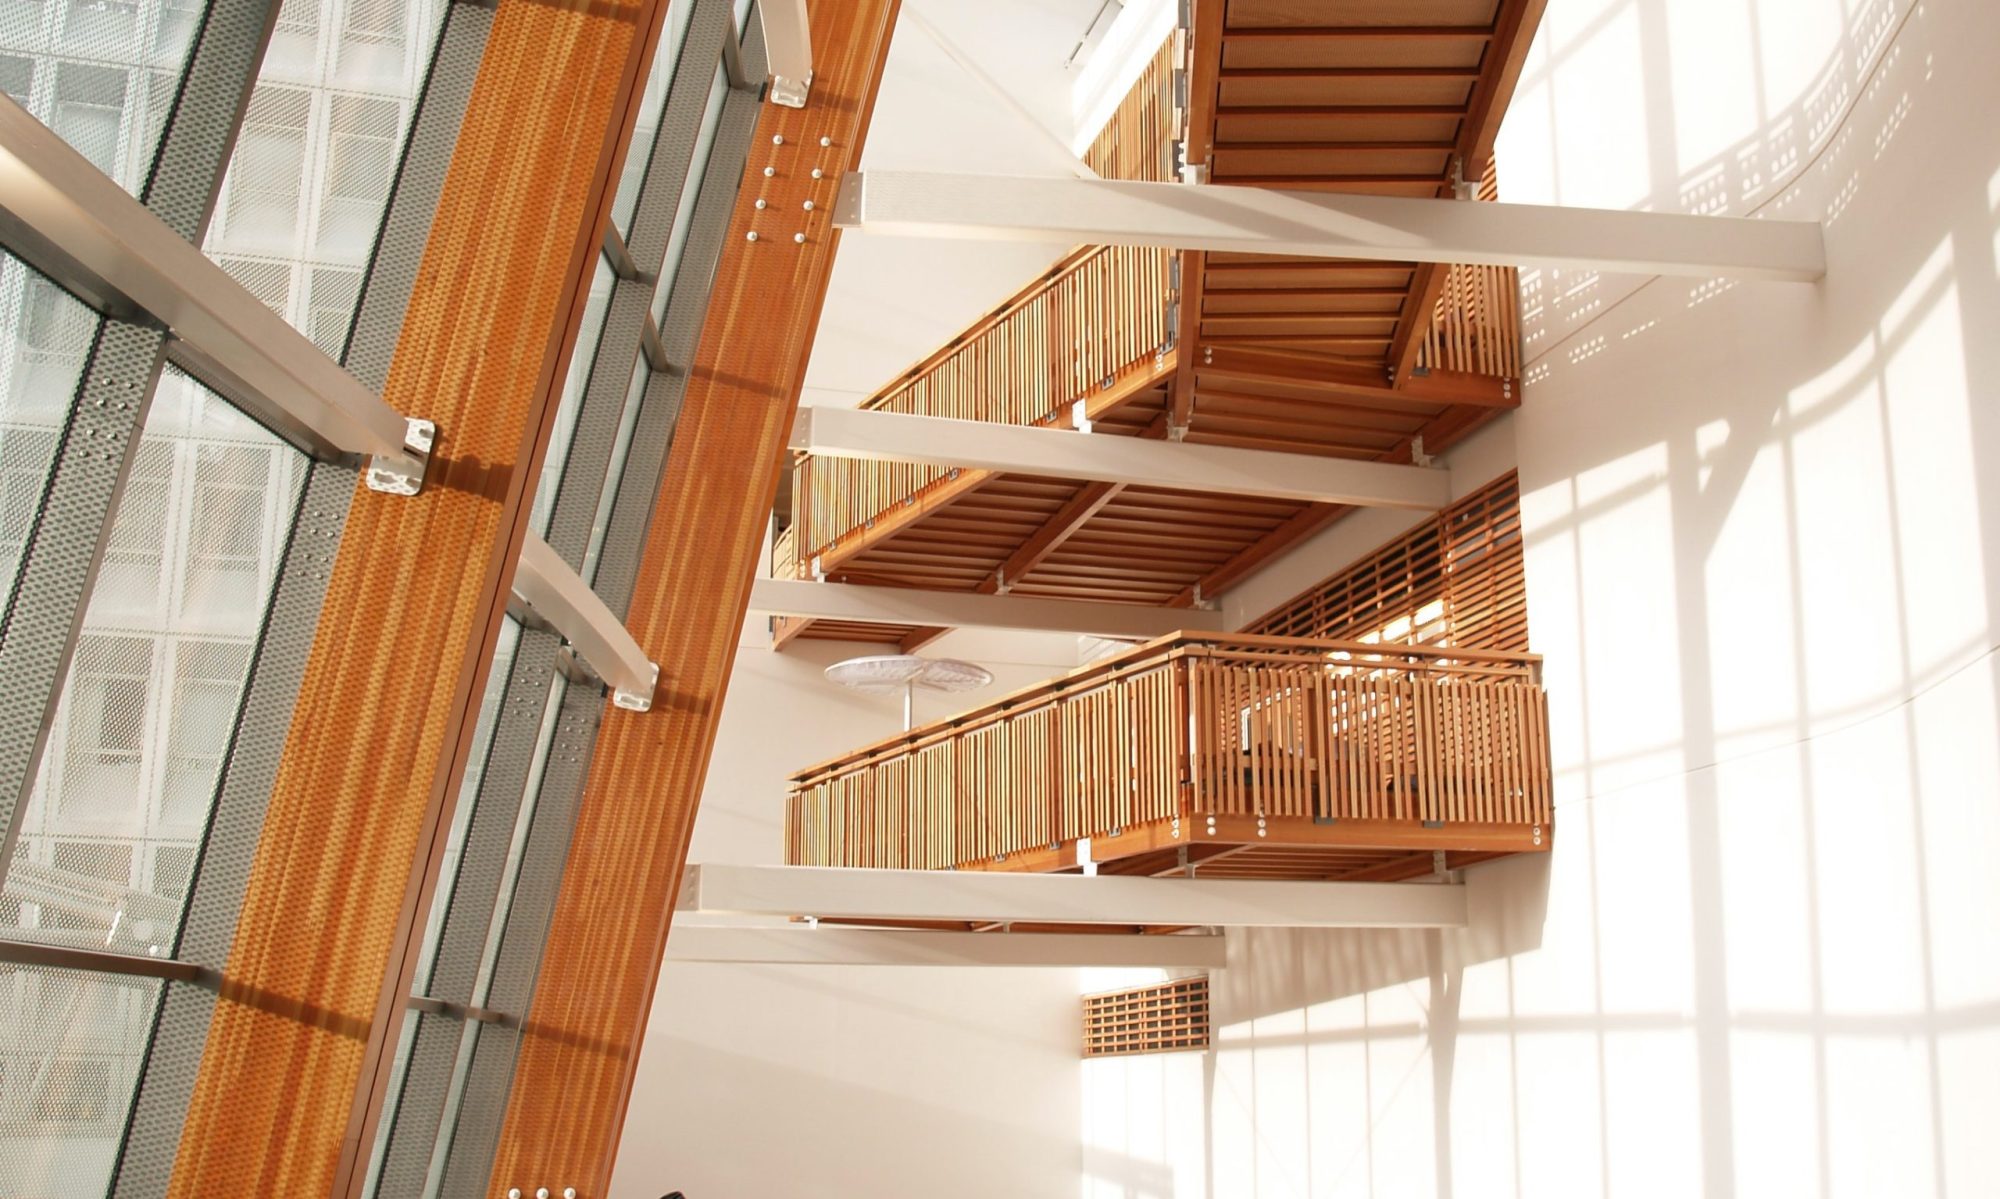 Image shows the internal balcony in the atrium of the Saltire Centre